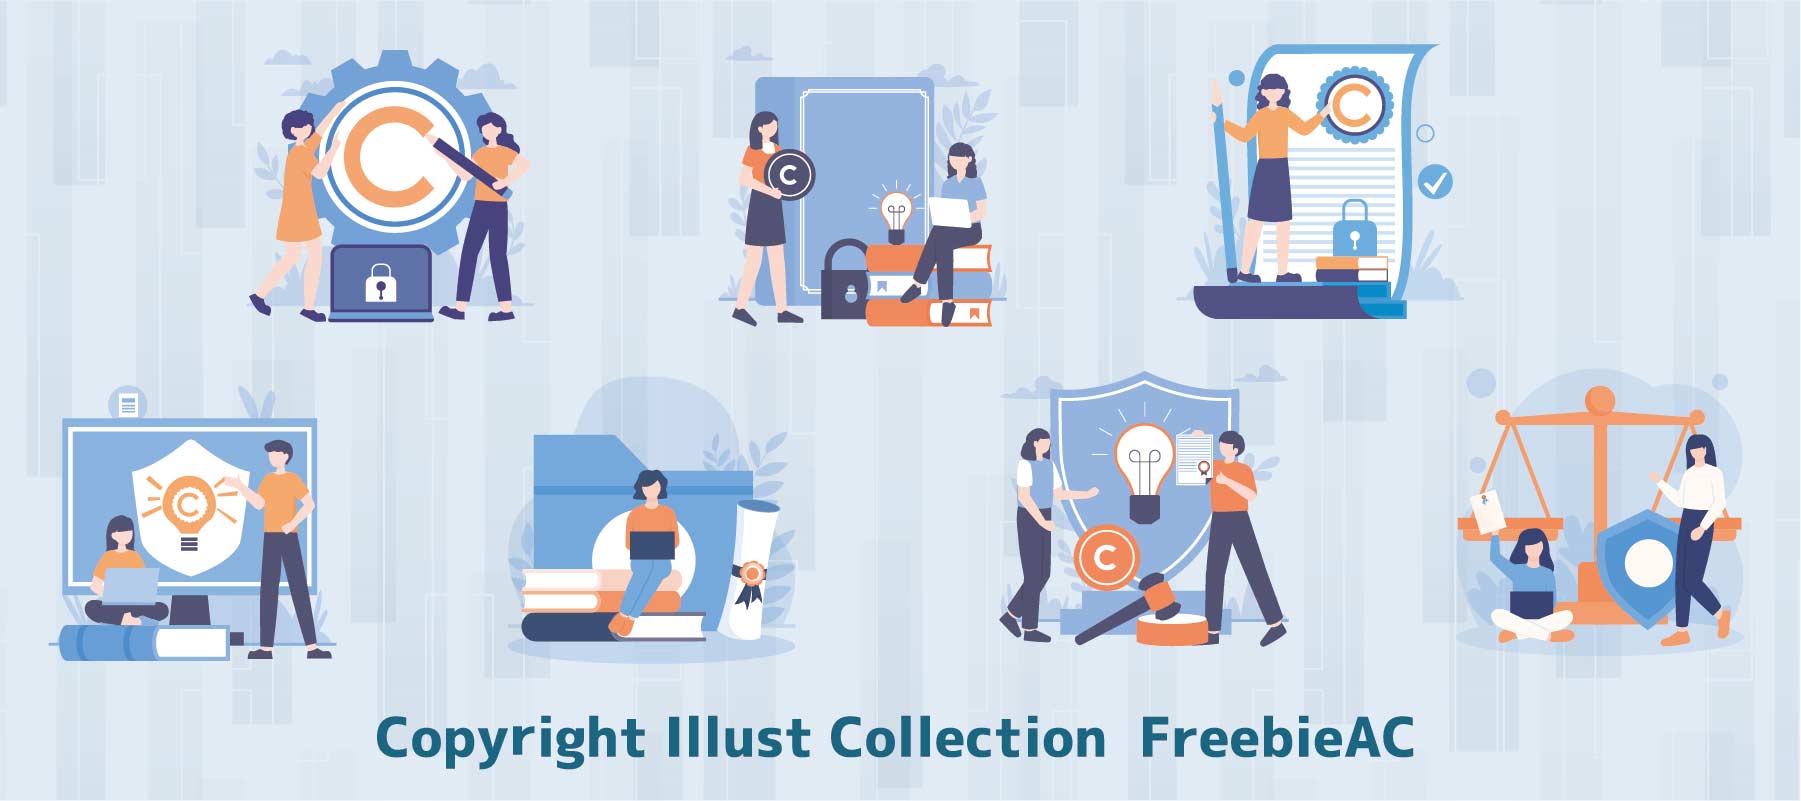 Copyright illustration collection